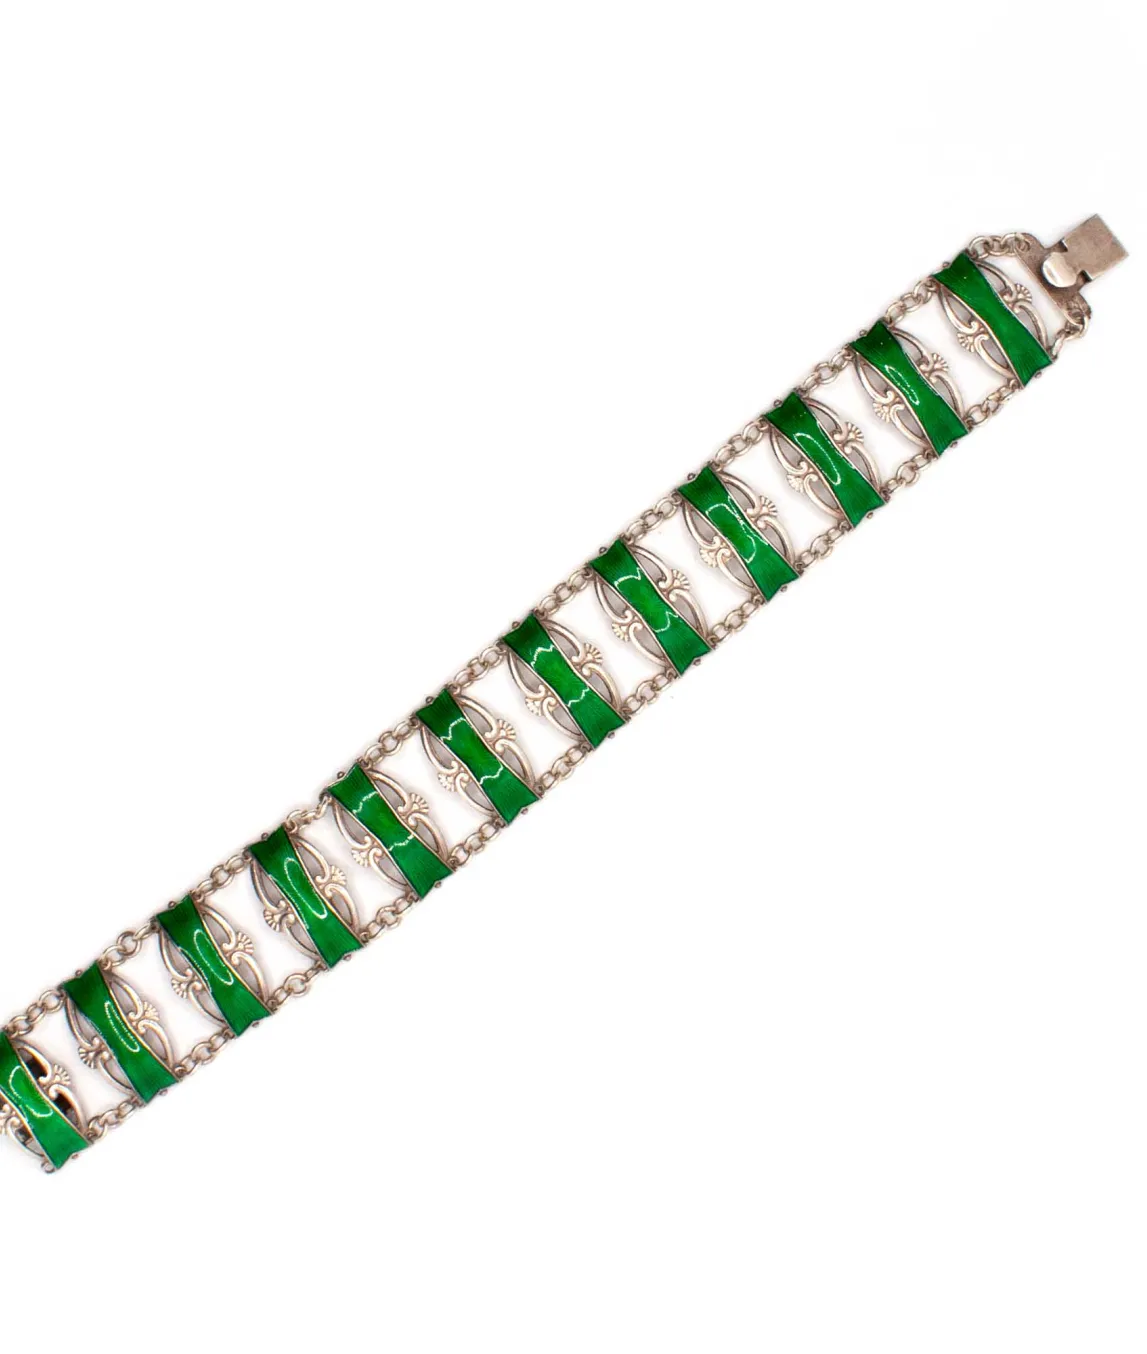 Emerald green enamel on sterling silver vintage bracelet laying flat and straight